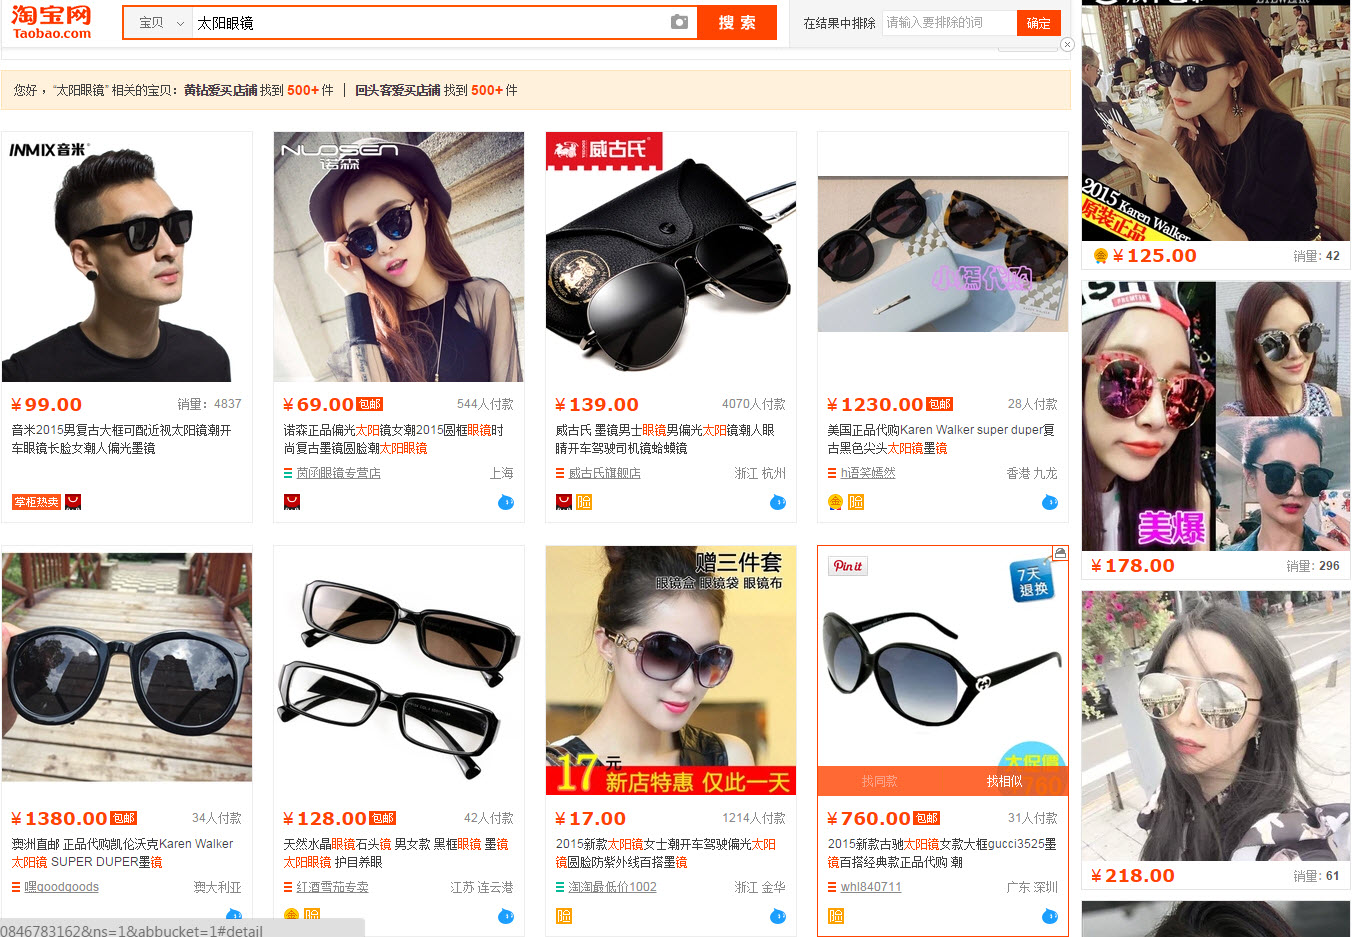 Chinese marketplace sites taobao search results